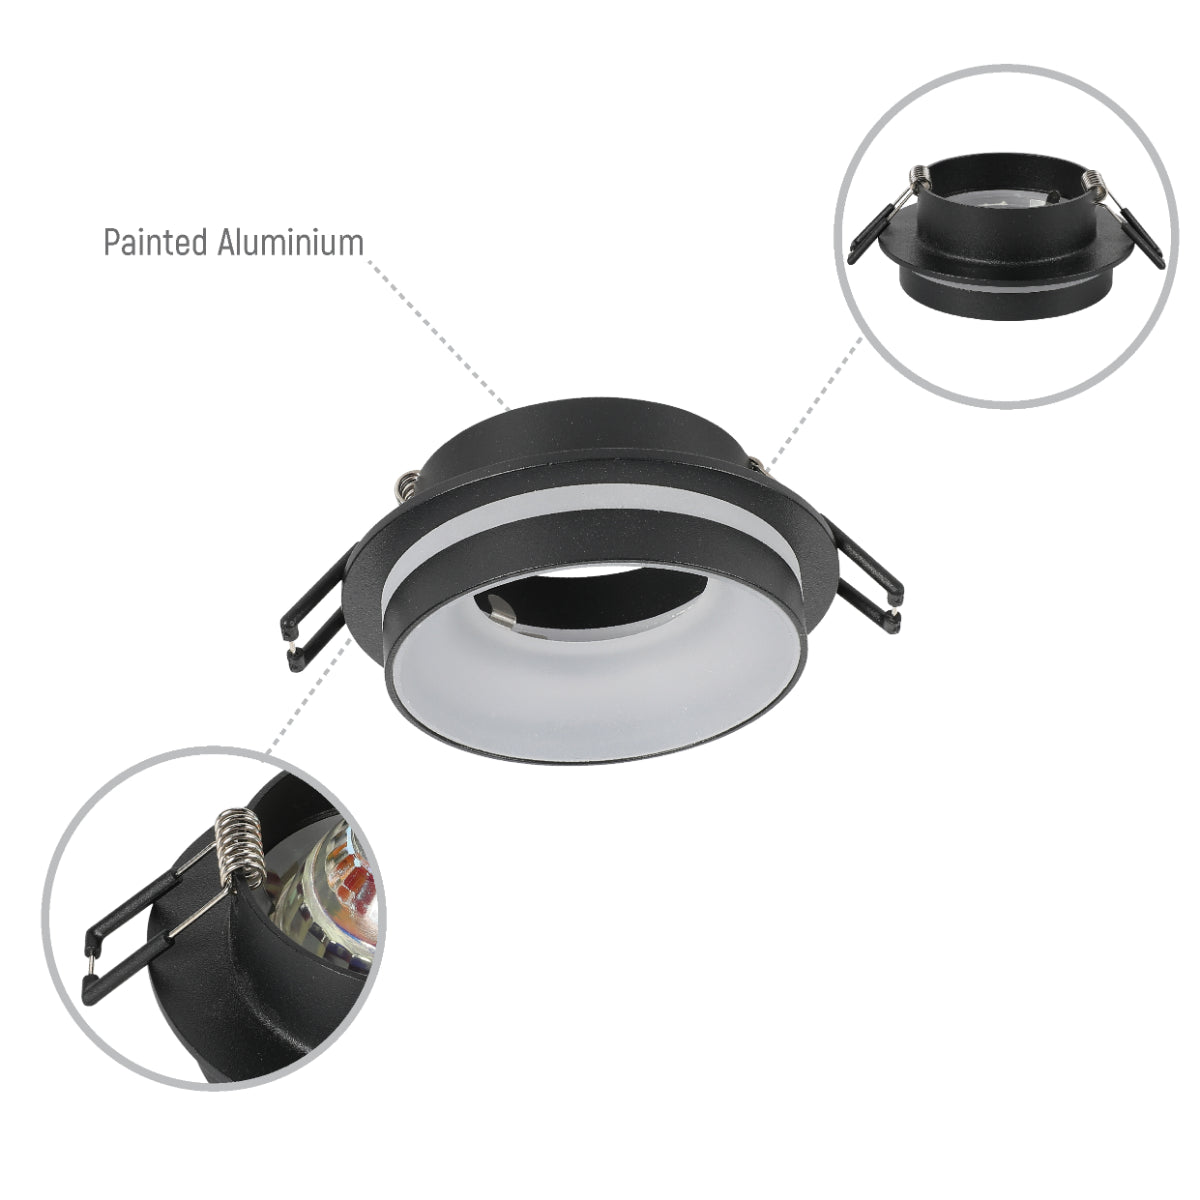 Lighting properties of GU10 Recessed Aluminium Downlight - Dual-Tone Acrylic with Color Matched Trim 143-04044